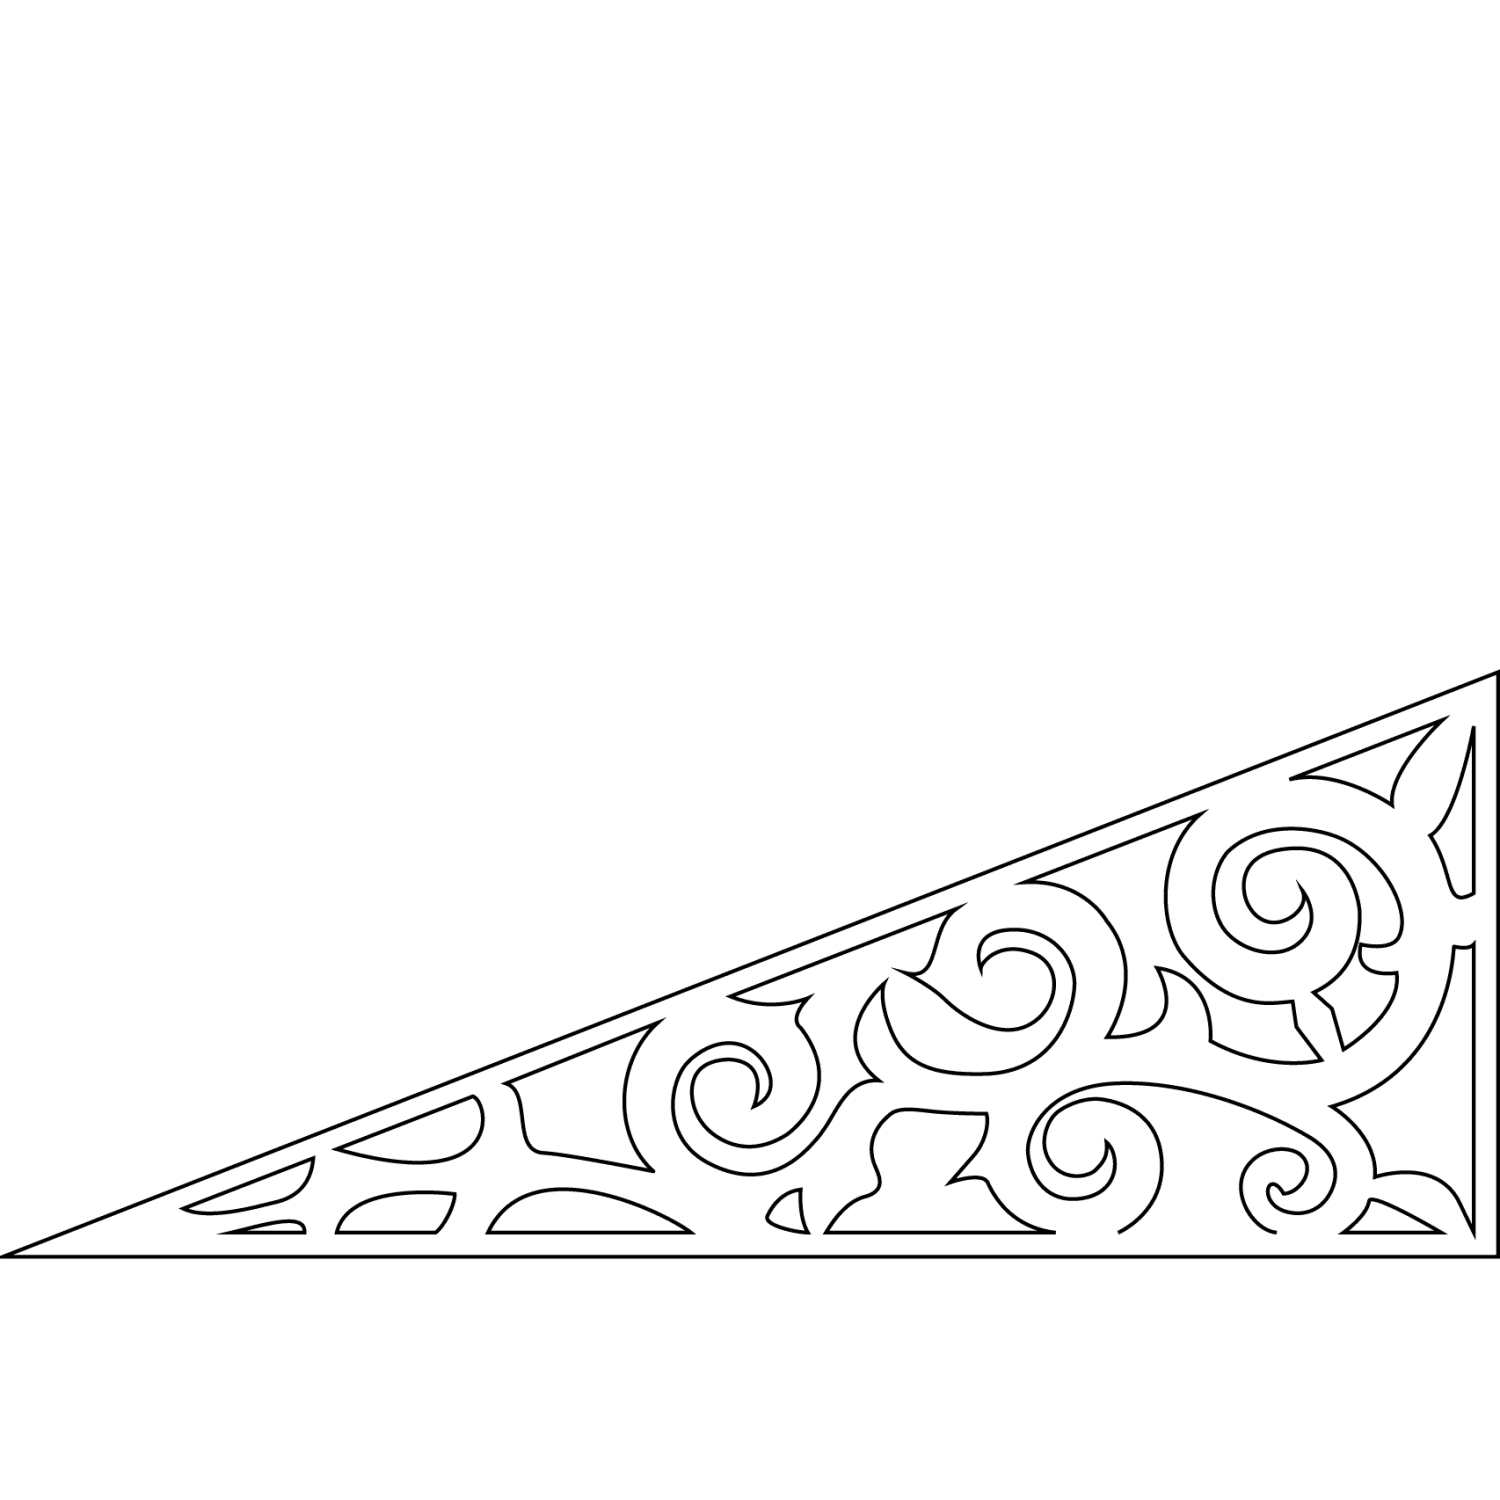 Gable infill 010 - Outline of a decorative victorian millwork as house decoration for roof and gable end